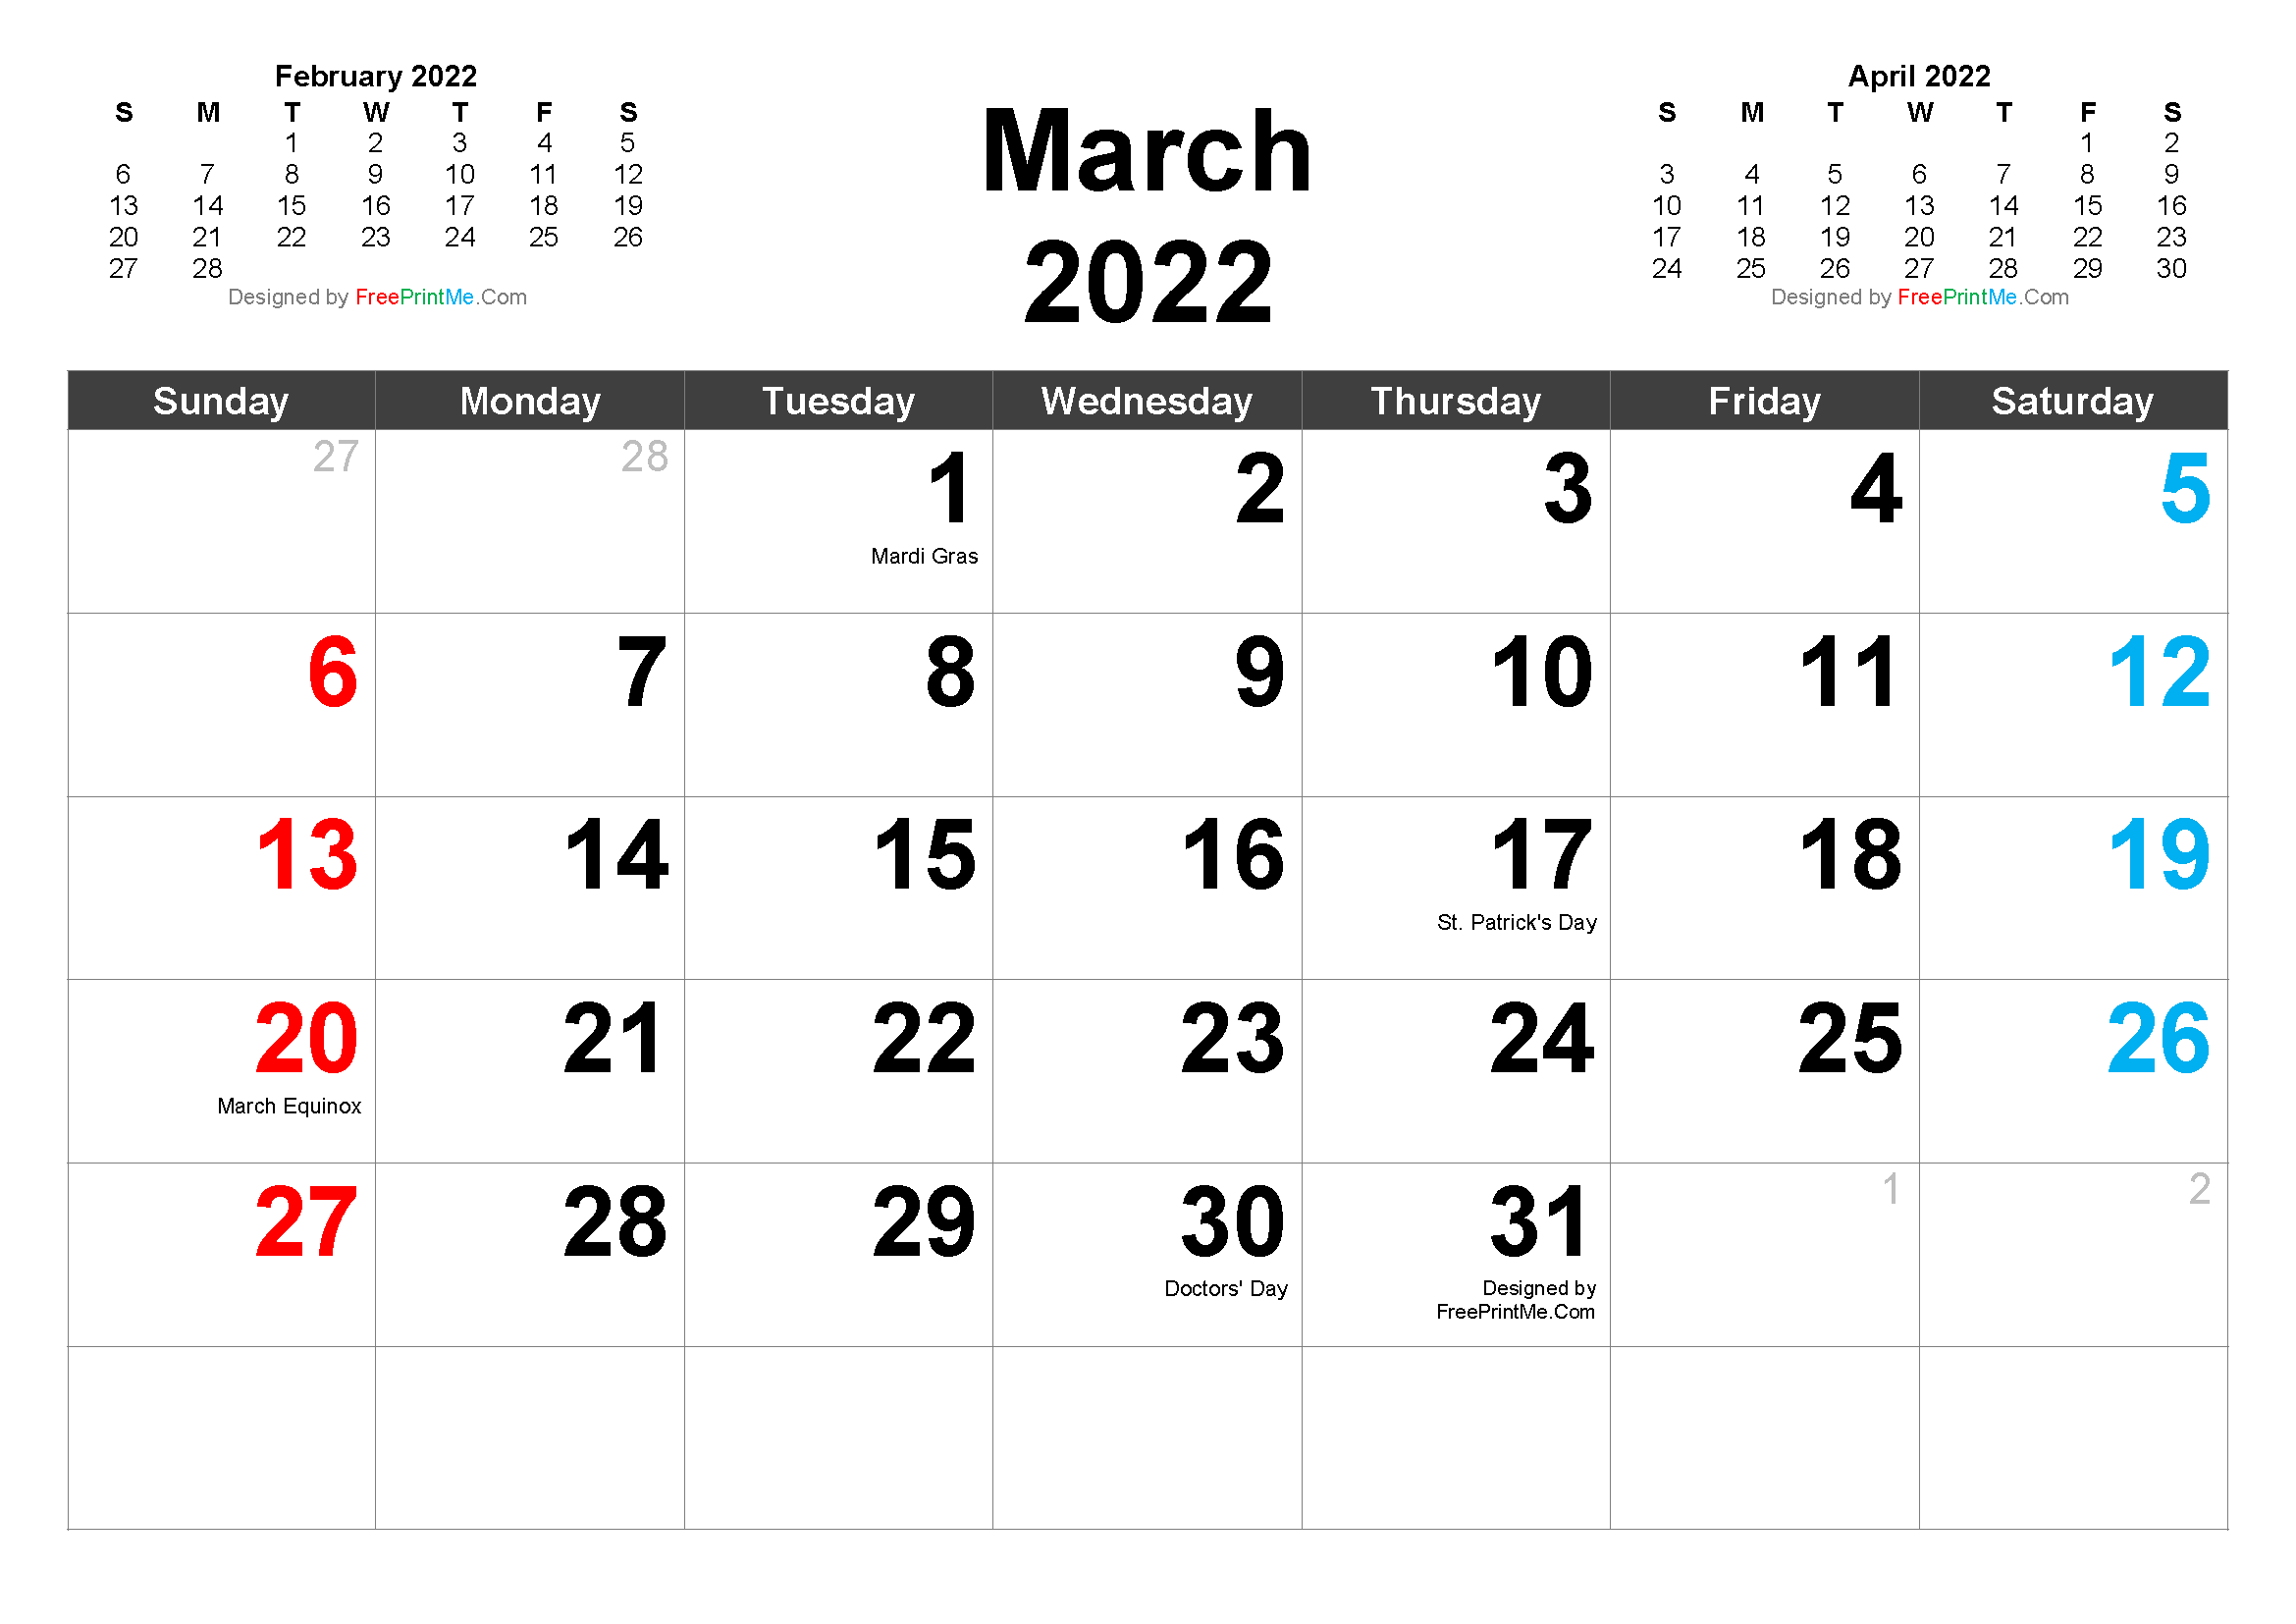 Free Printable 2022 Monthly Calendar Free Printable March 2022 Calendar Pdf And Image